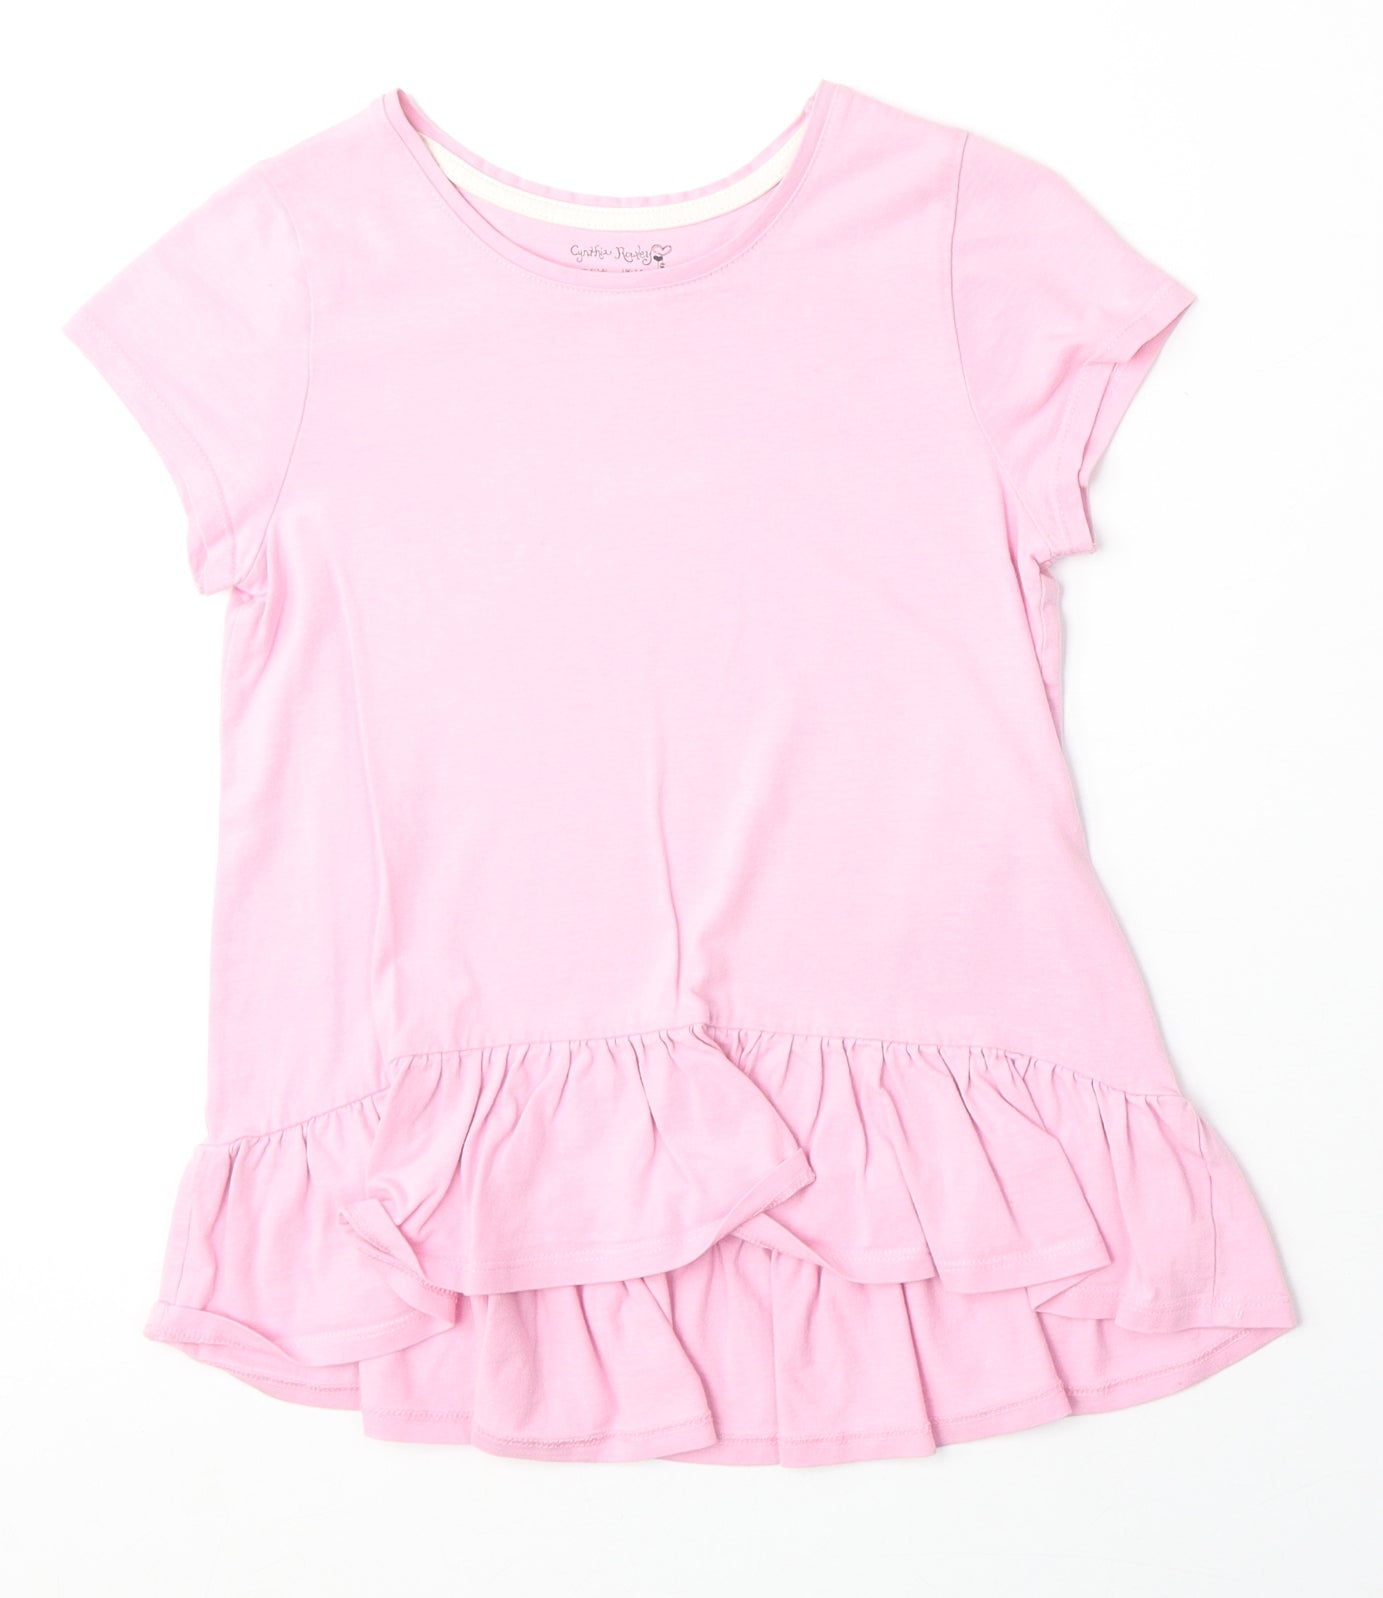 Cynthia Rowley Girls Pink Polyester Basic T-Shirt Size 7-8 Years Round Neck Pullover